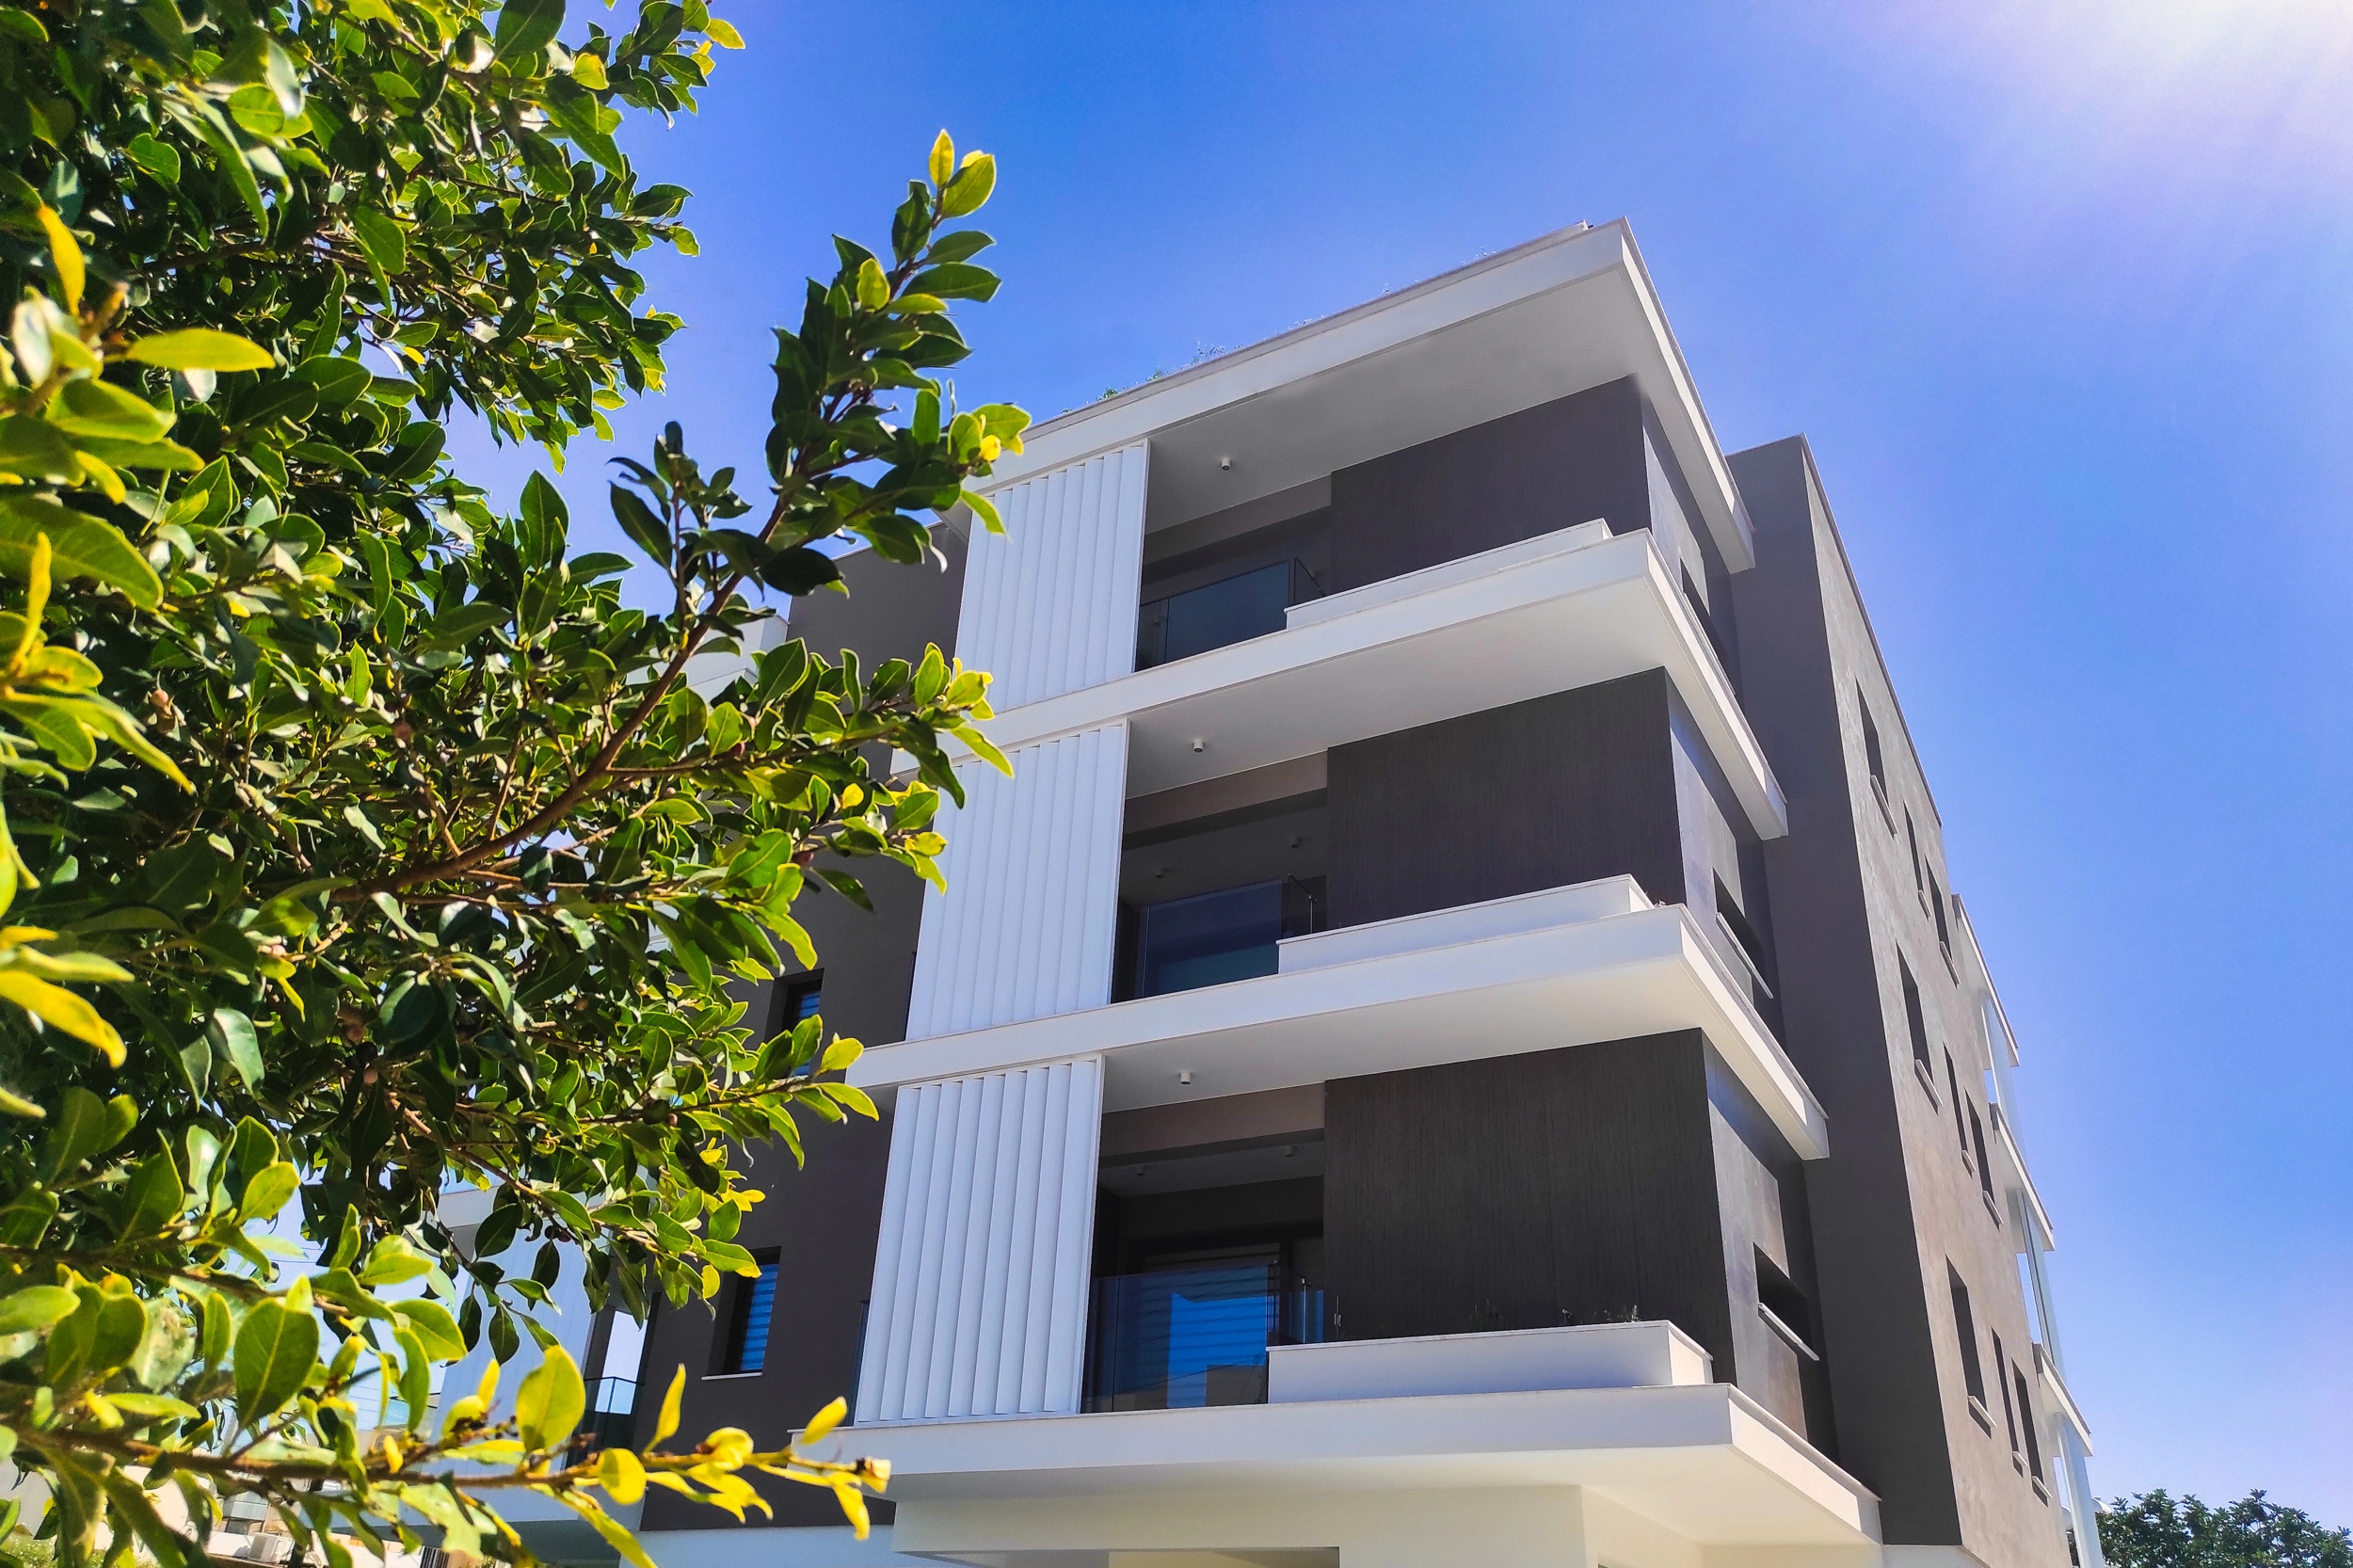 3 Bedroom Apartment for Sale in Limassol